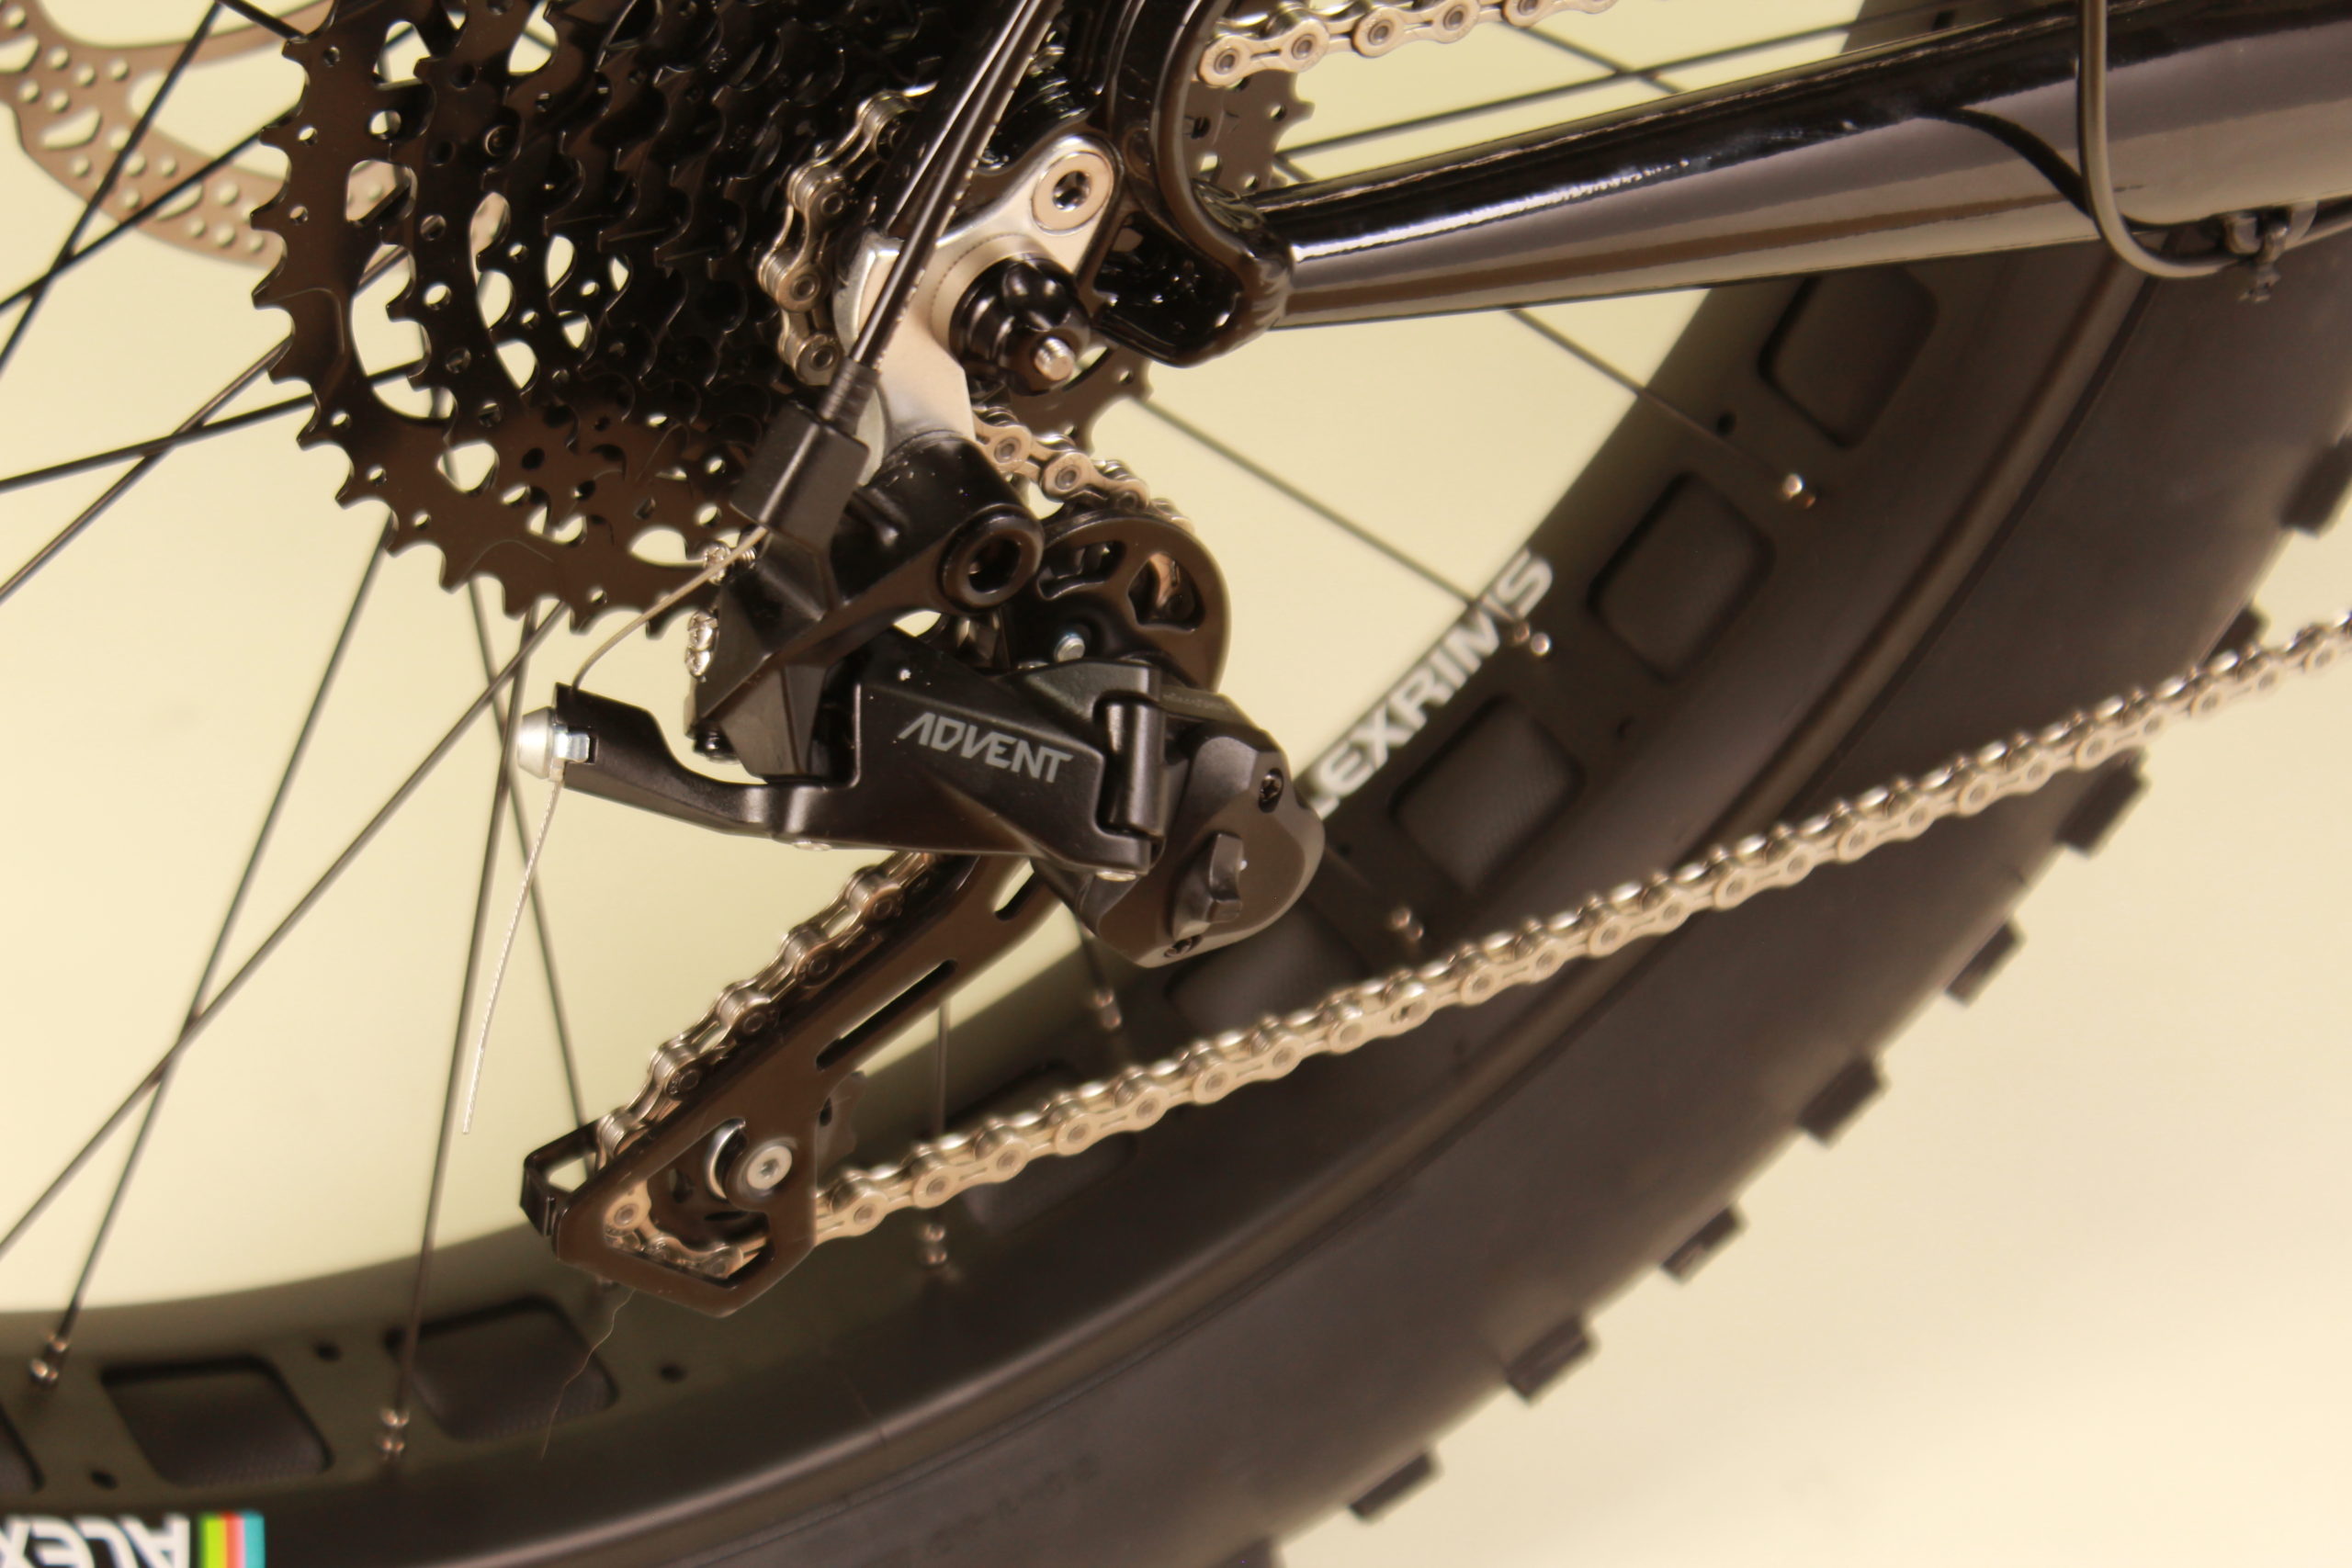 shifter and derailleur